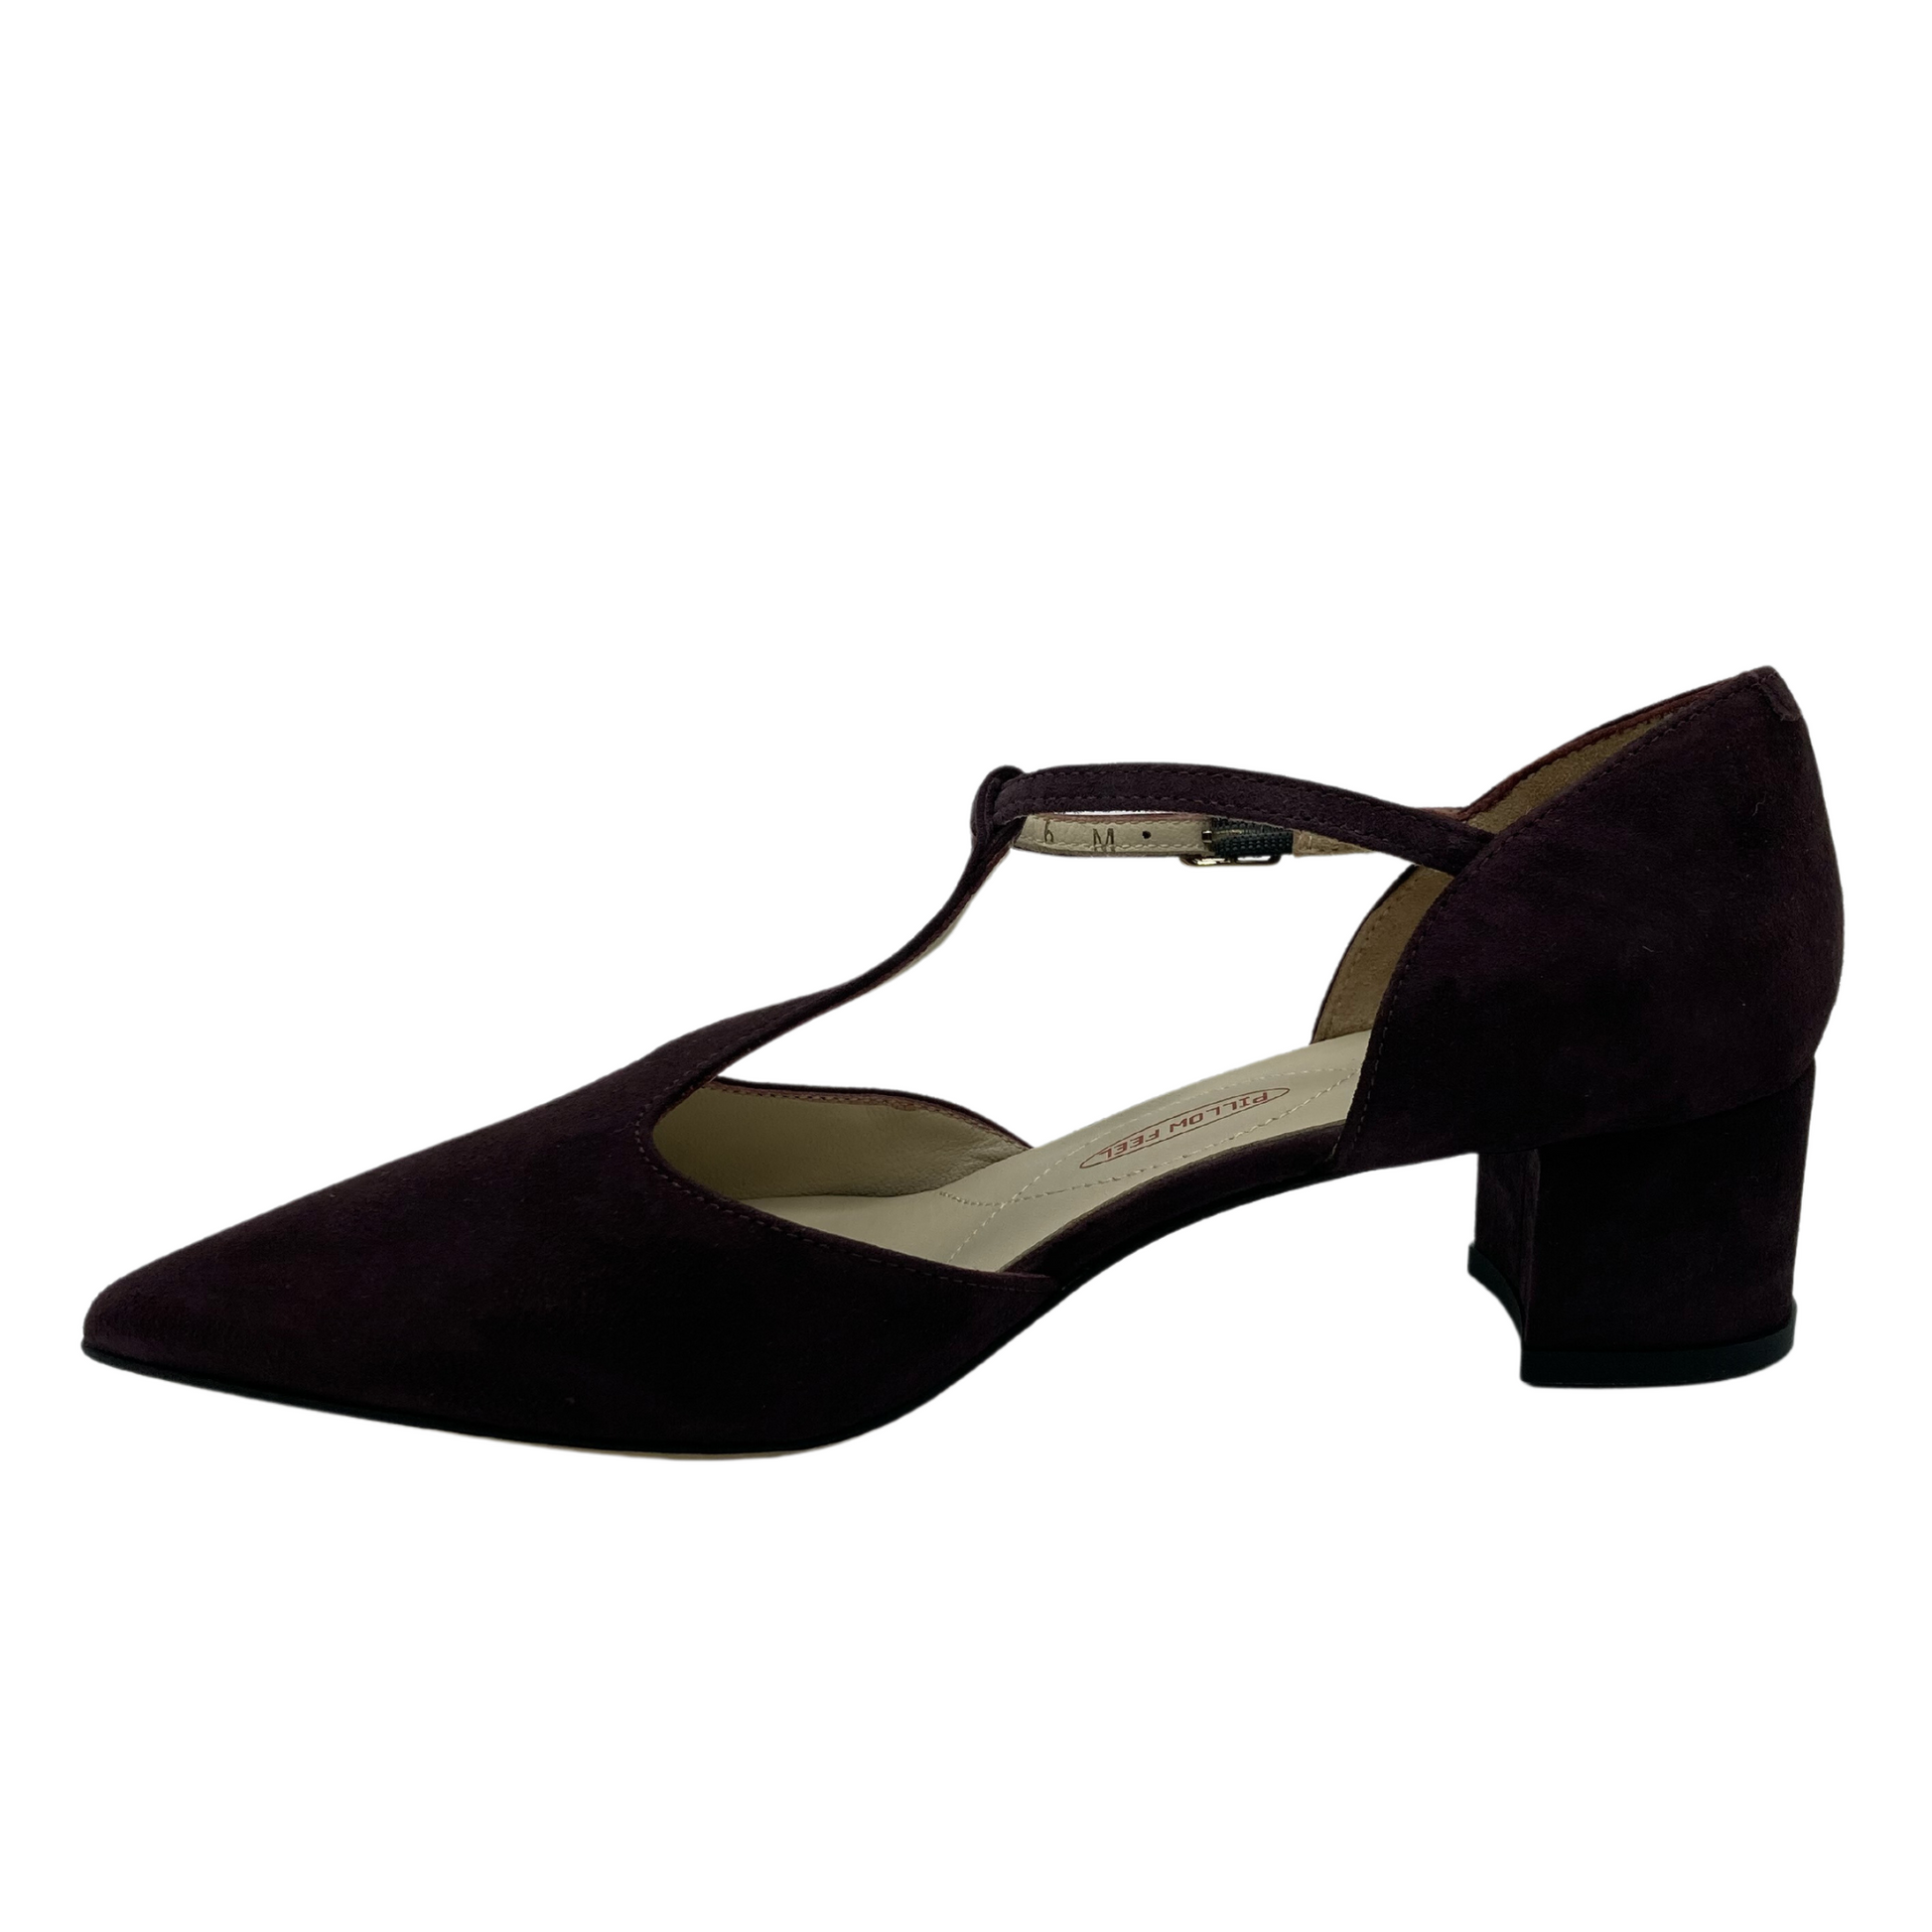 Left facing view of pointed toe pump with block heel and delicate upper strap